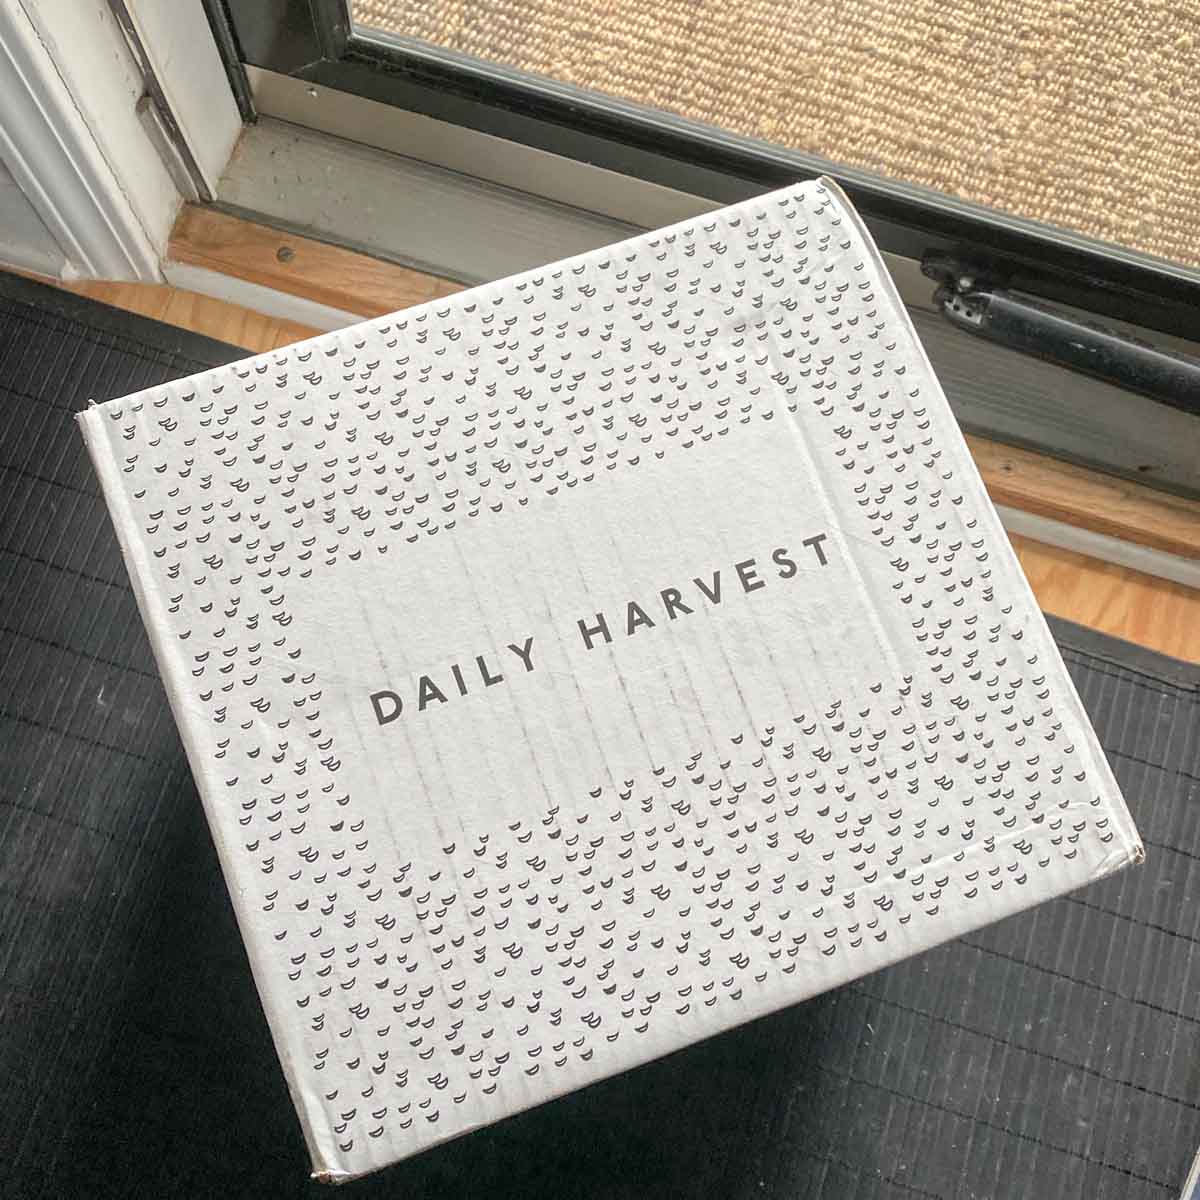 Daily Harvest delivery box